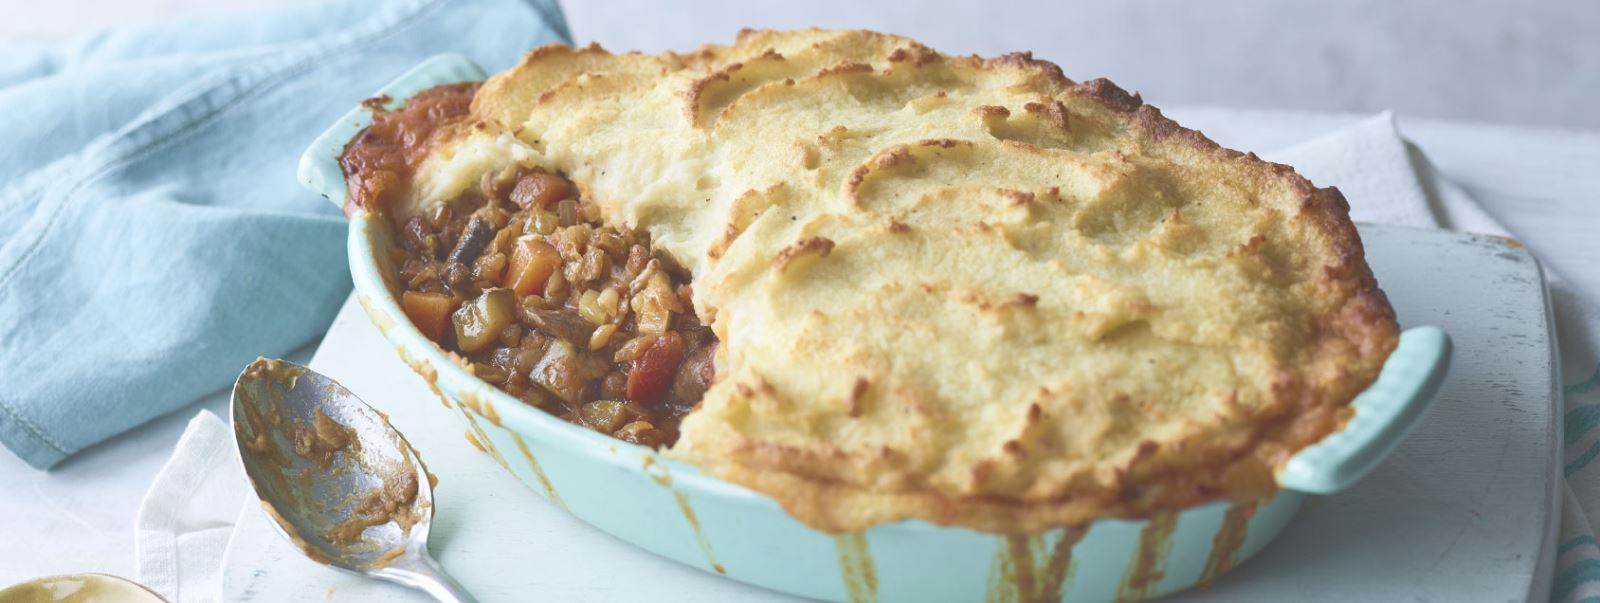 Shephards Pie at Parkside House